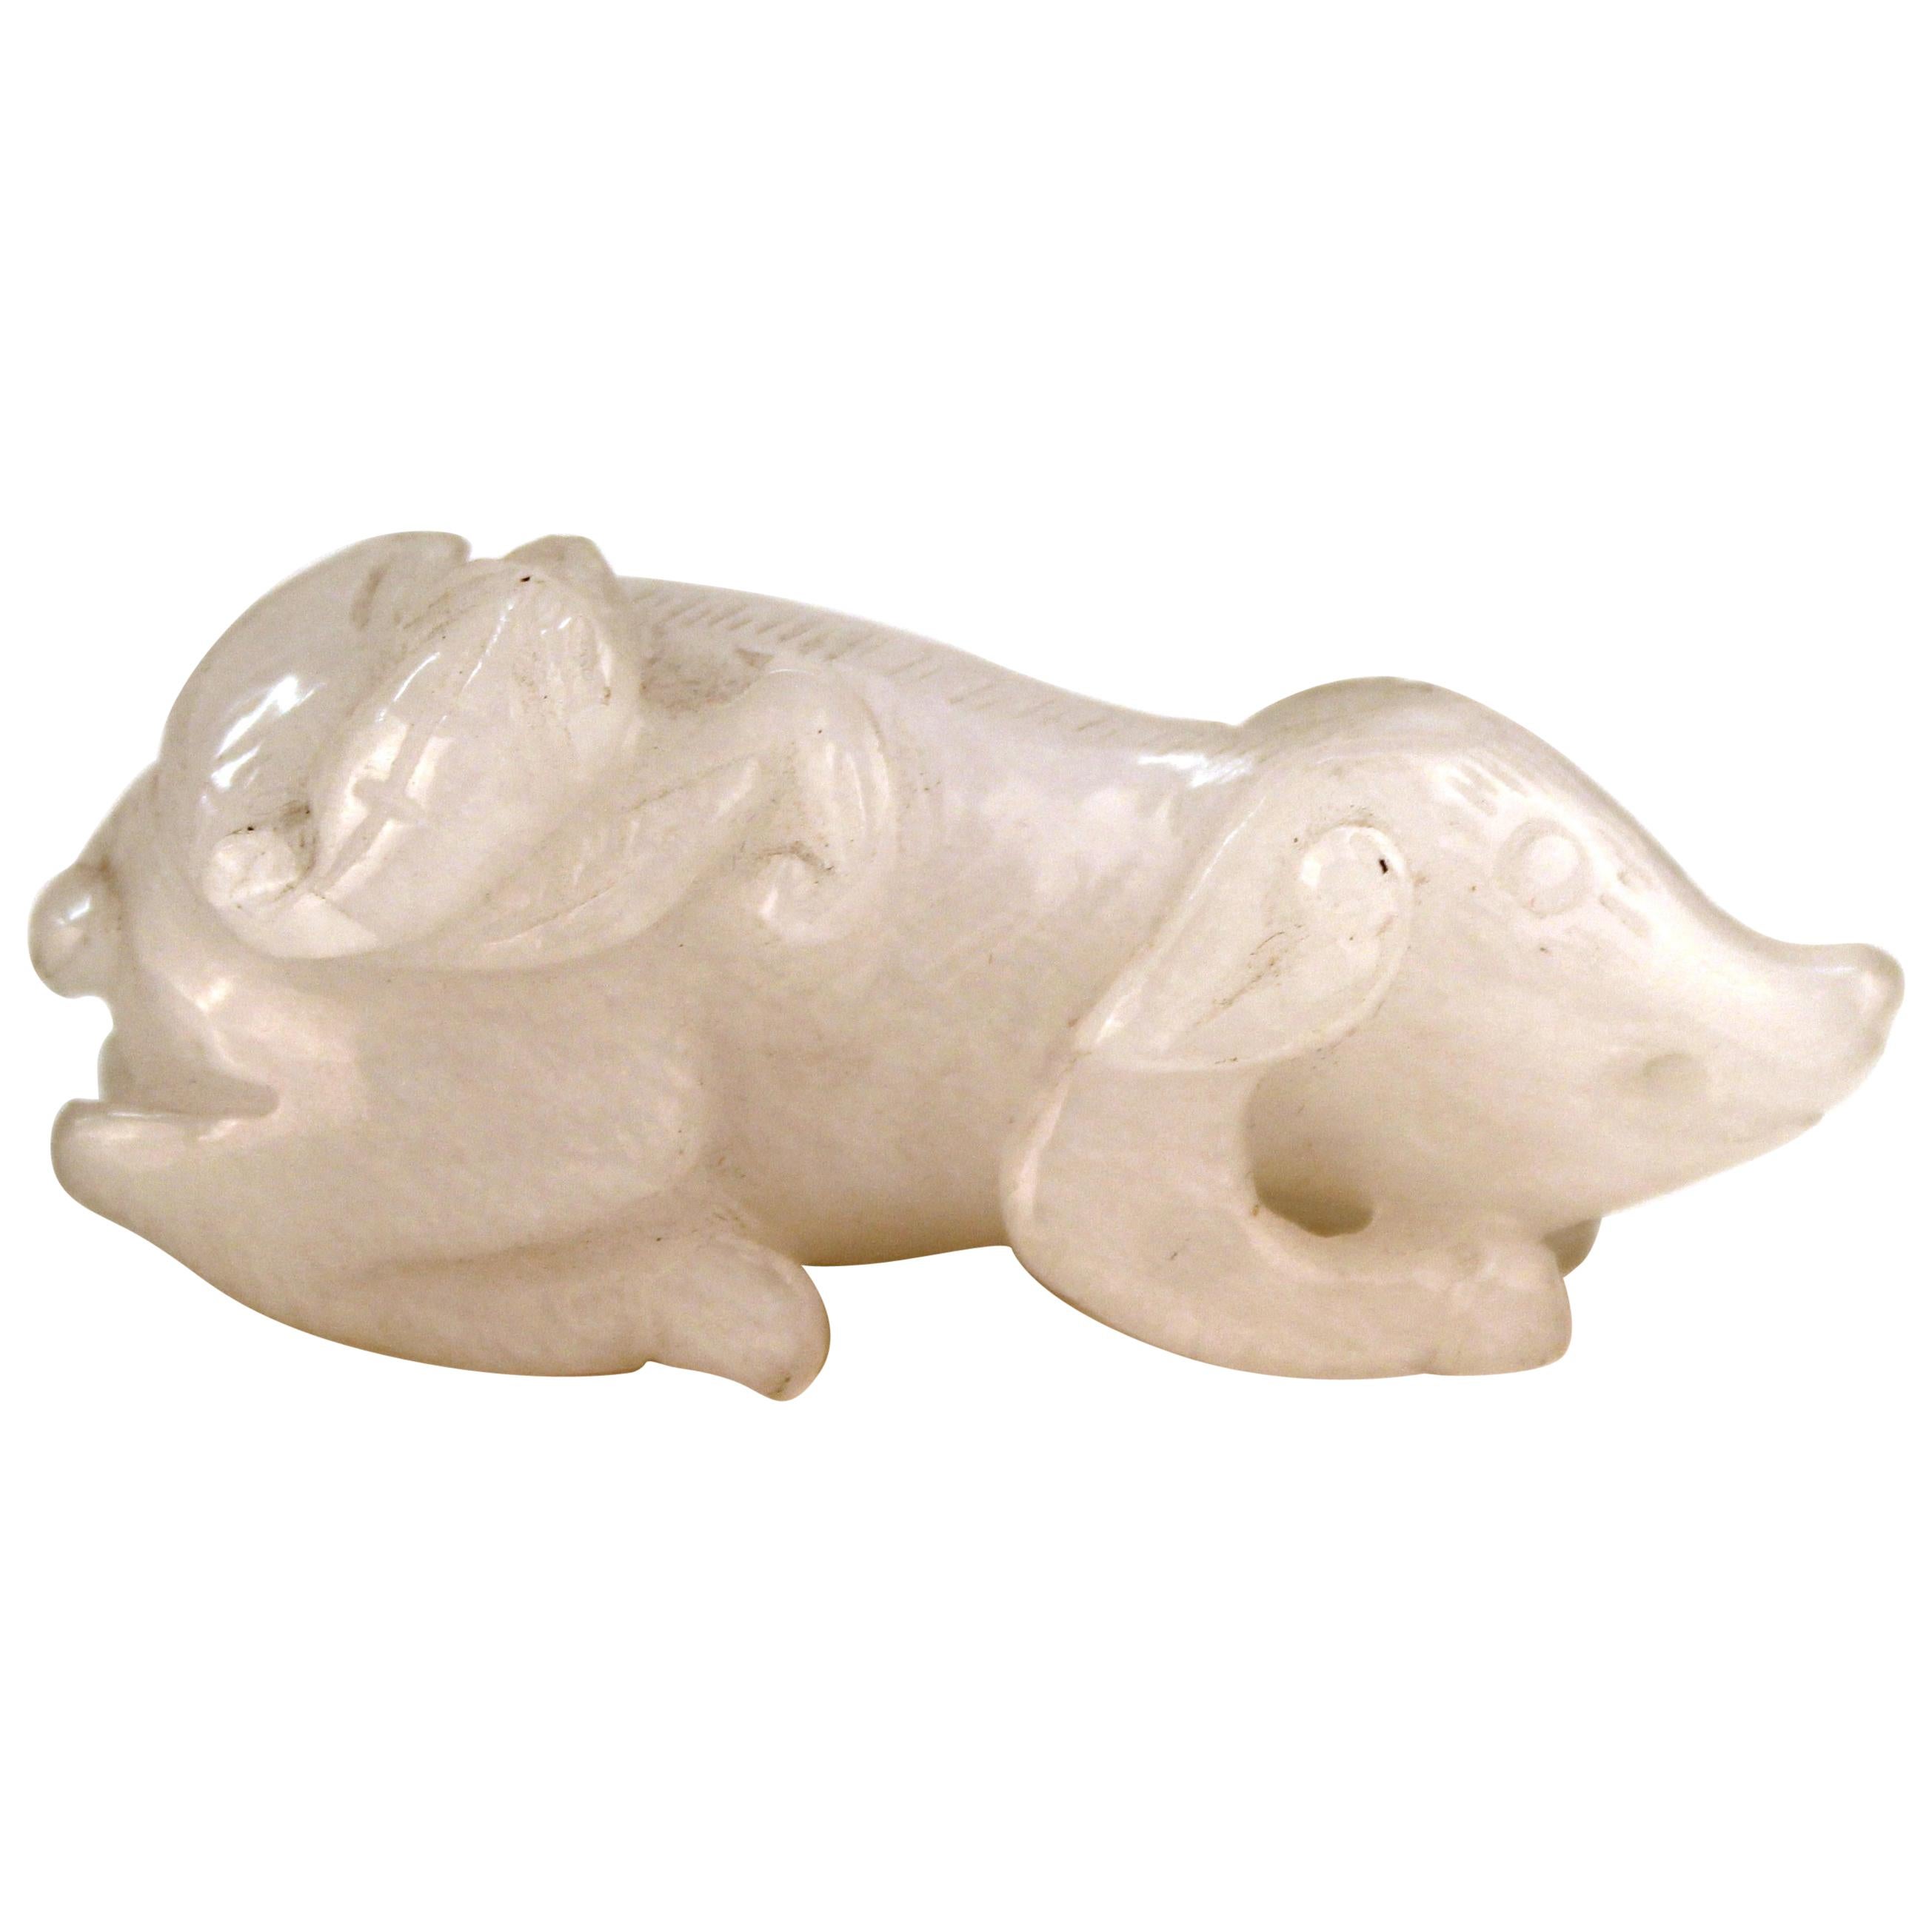 Chinese White Jadeite Sculpture of a Small Pig with Bat